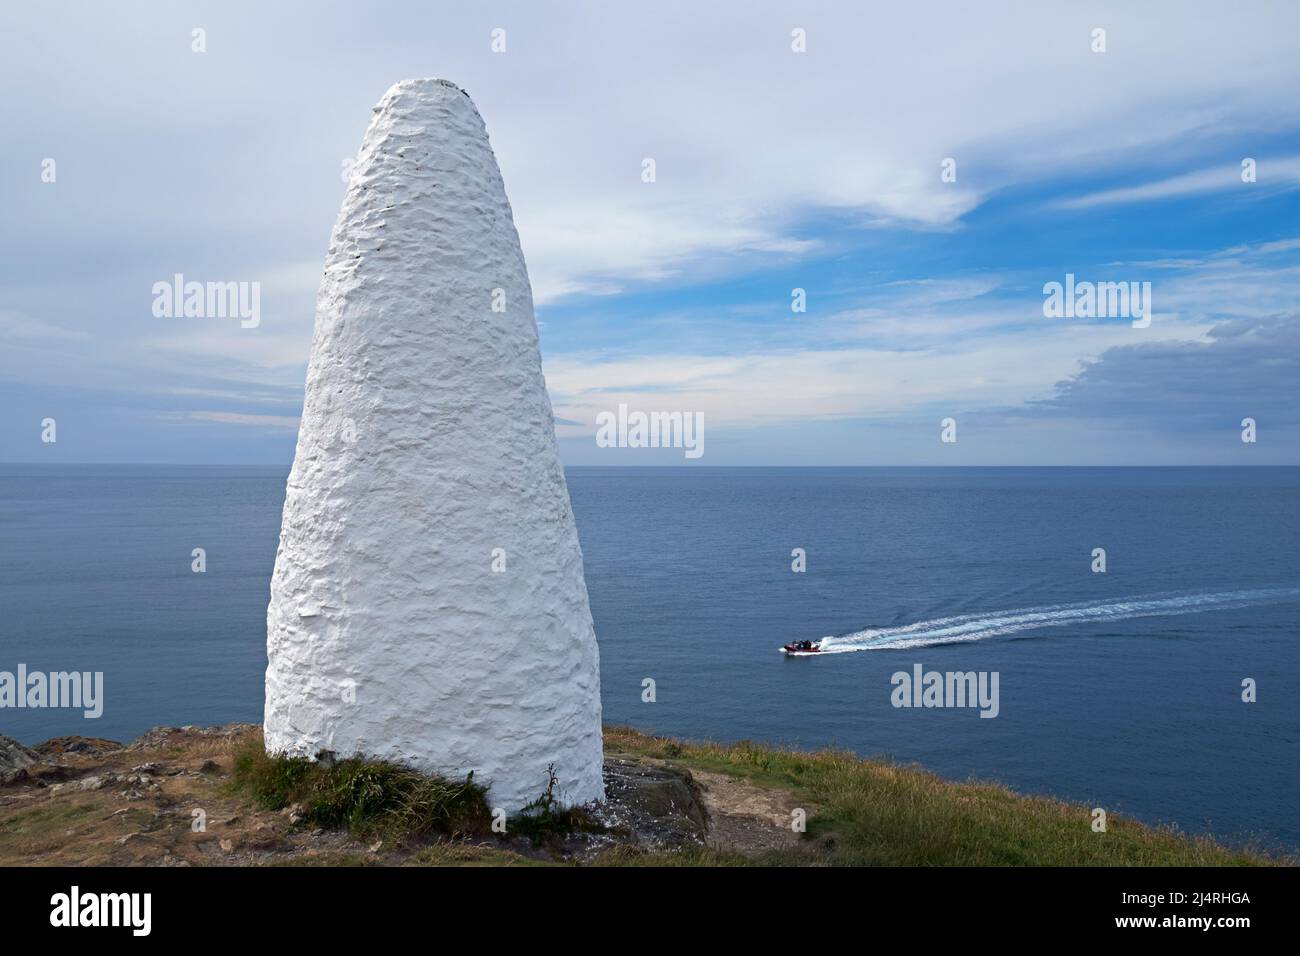 A whitewashed stone cairn marking the harbour at Porthgain, Pembrokeshire, Wales, UK. Stock Photo